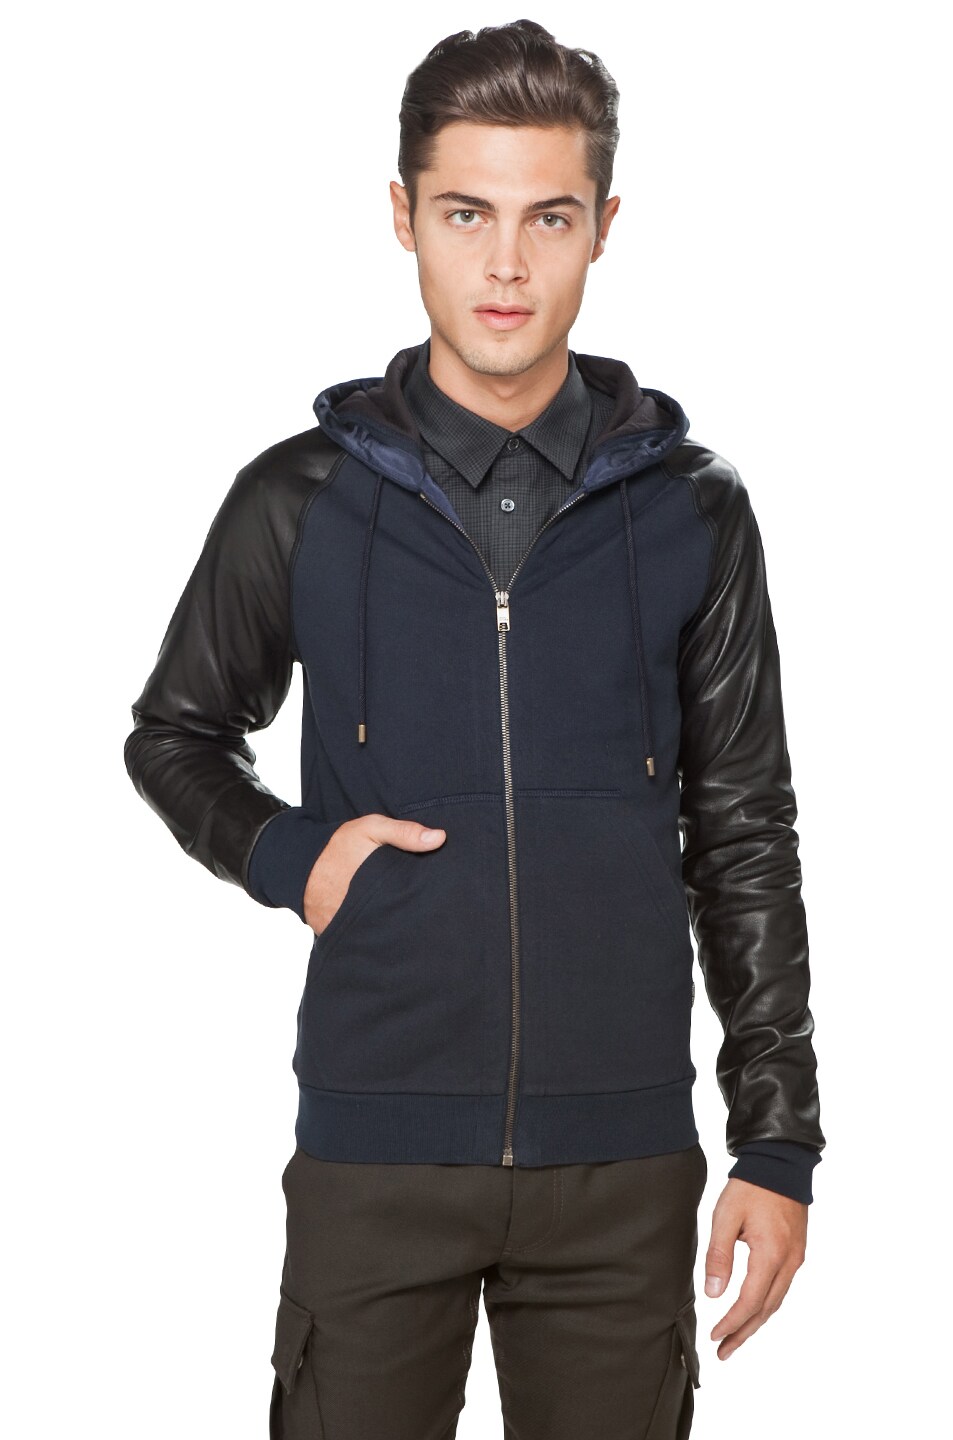 Image 1 of Marc Jacobs Winter Fleece Zip Up with Leather Sleeves in Normandy Blue & Black